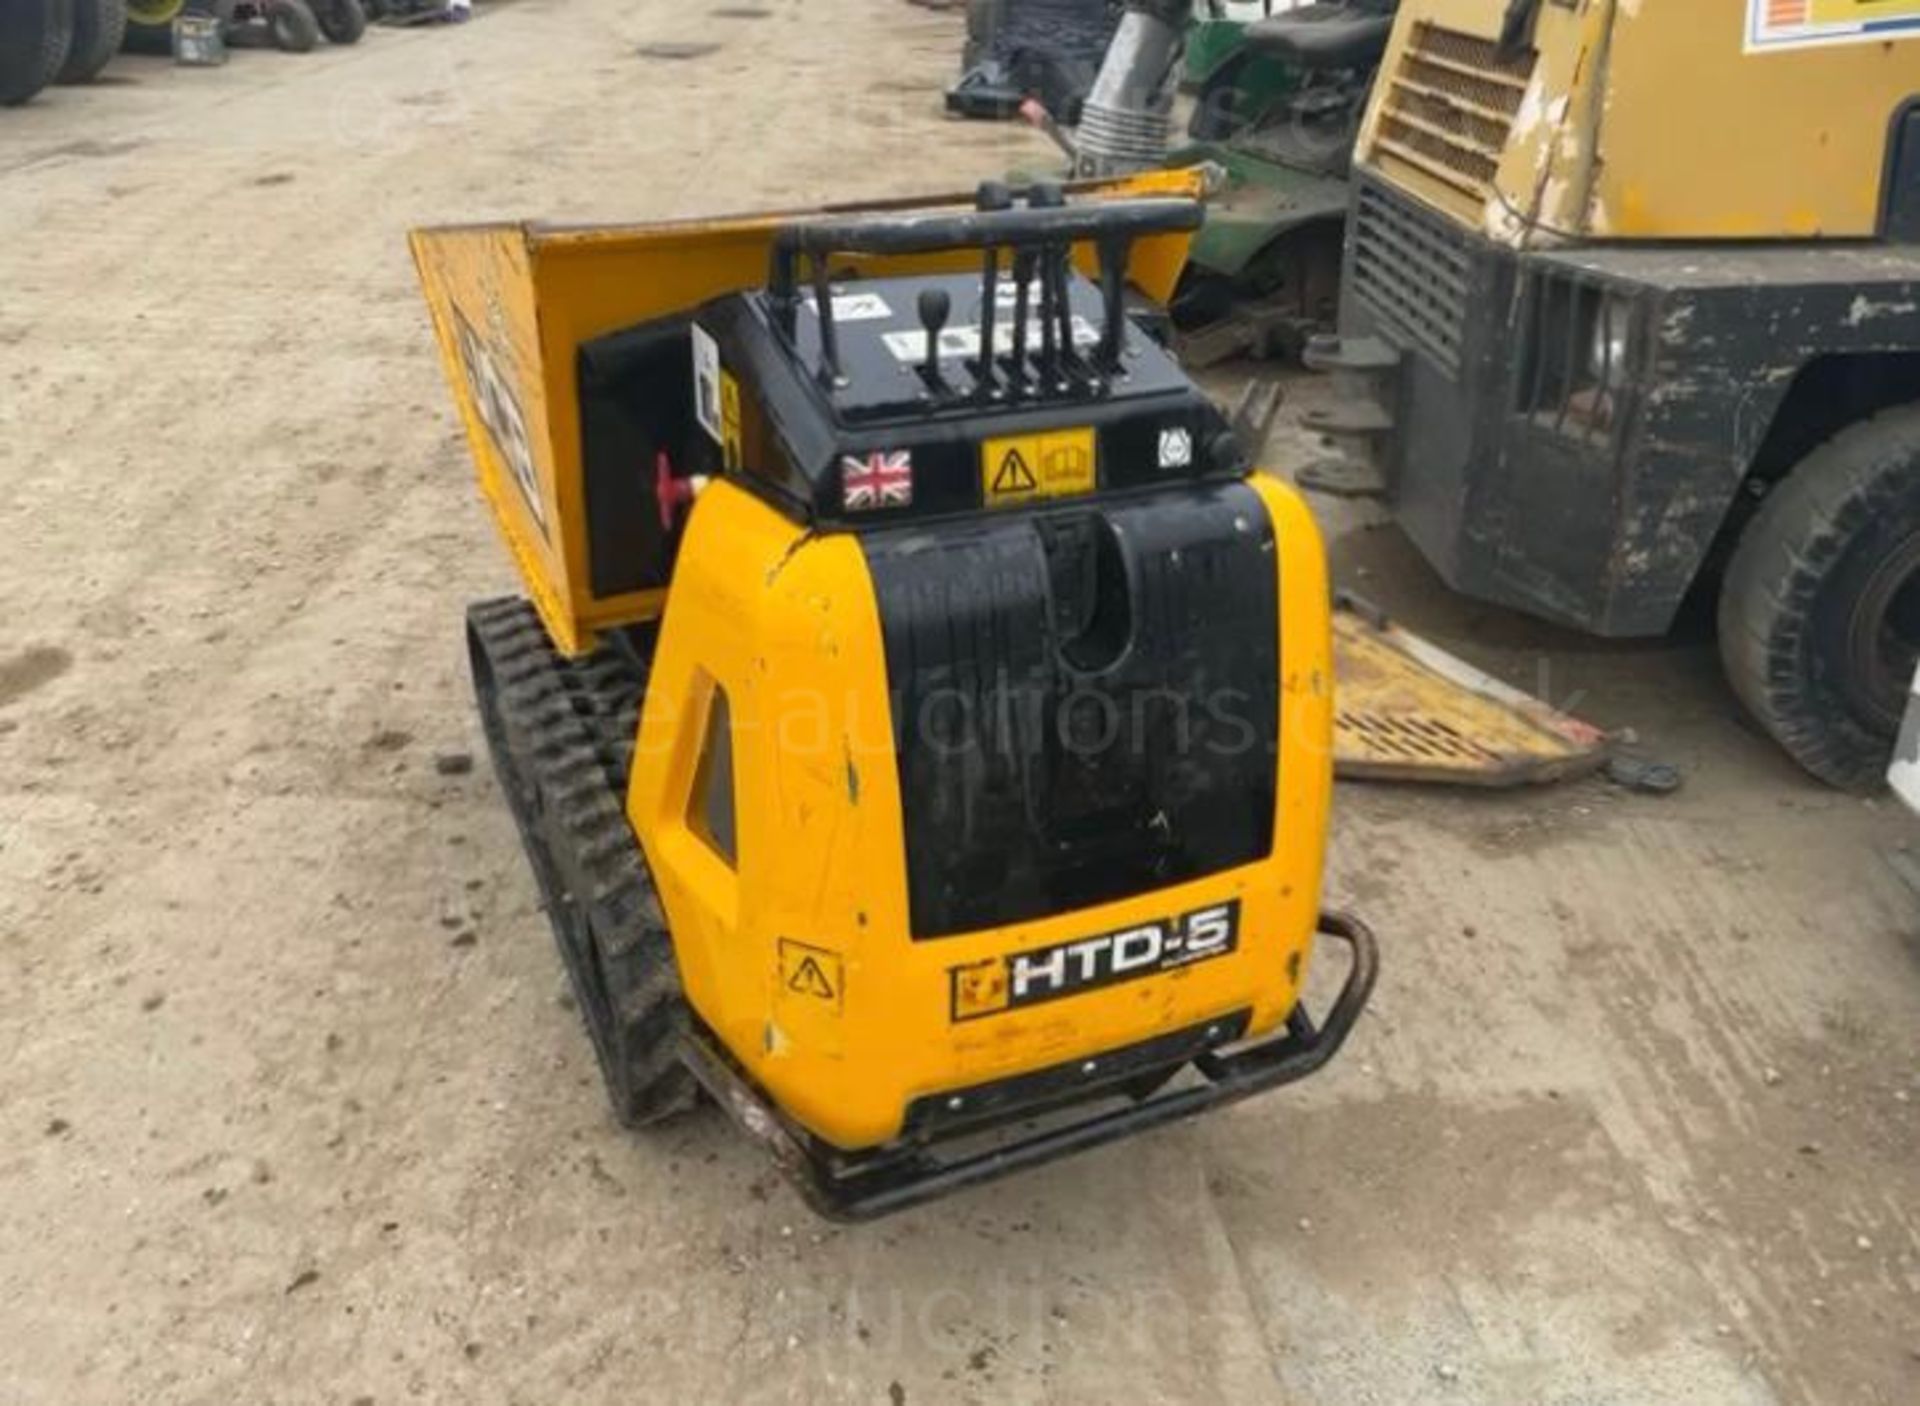 2019 JCB HTD-5 DIESEL TRACKED DUMPER, RUNS DRIVES AND WORKS WELL, ELECTRIC OR PULL START *PLUS VAT* - Image 8 of 20